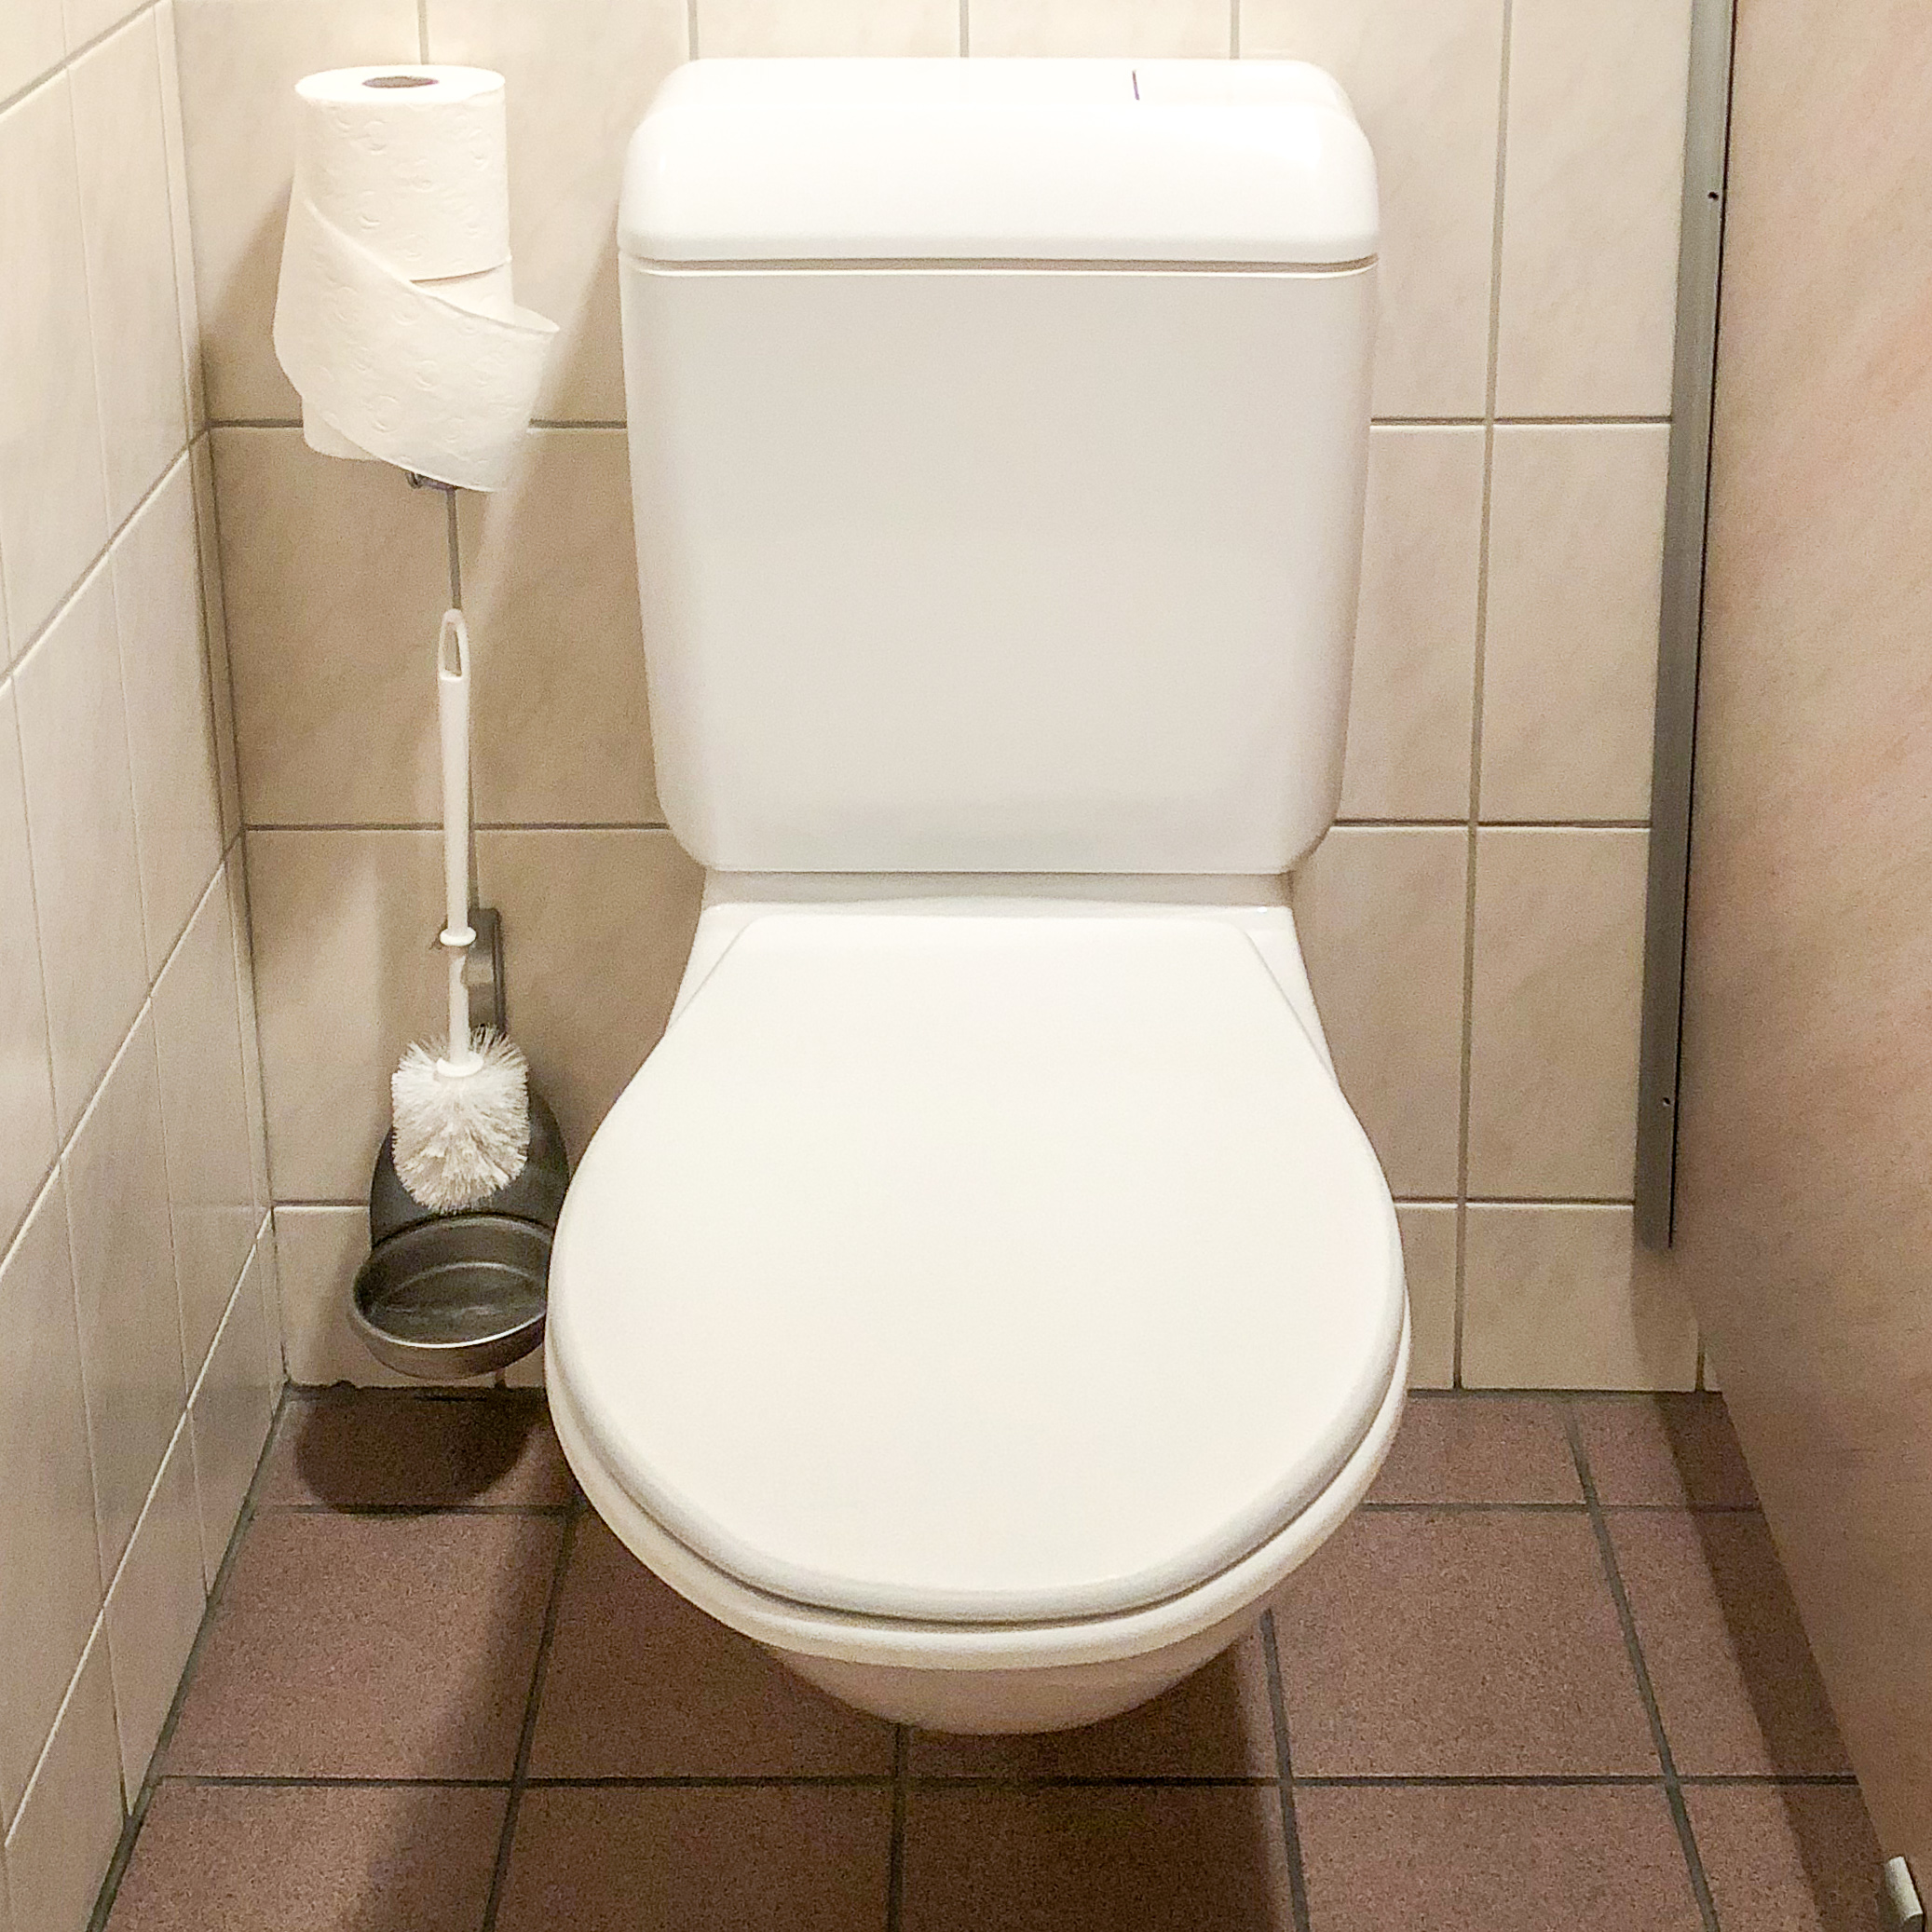 Swiss Toilet Review